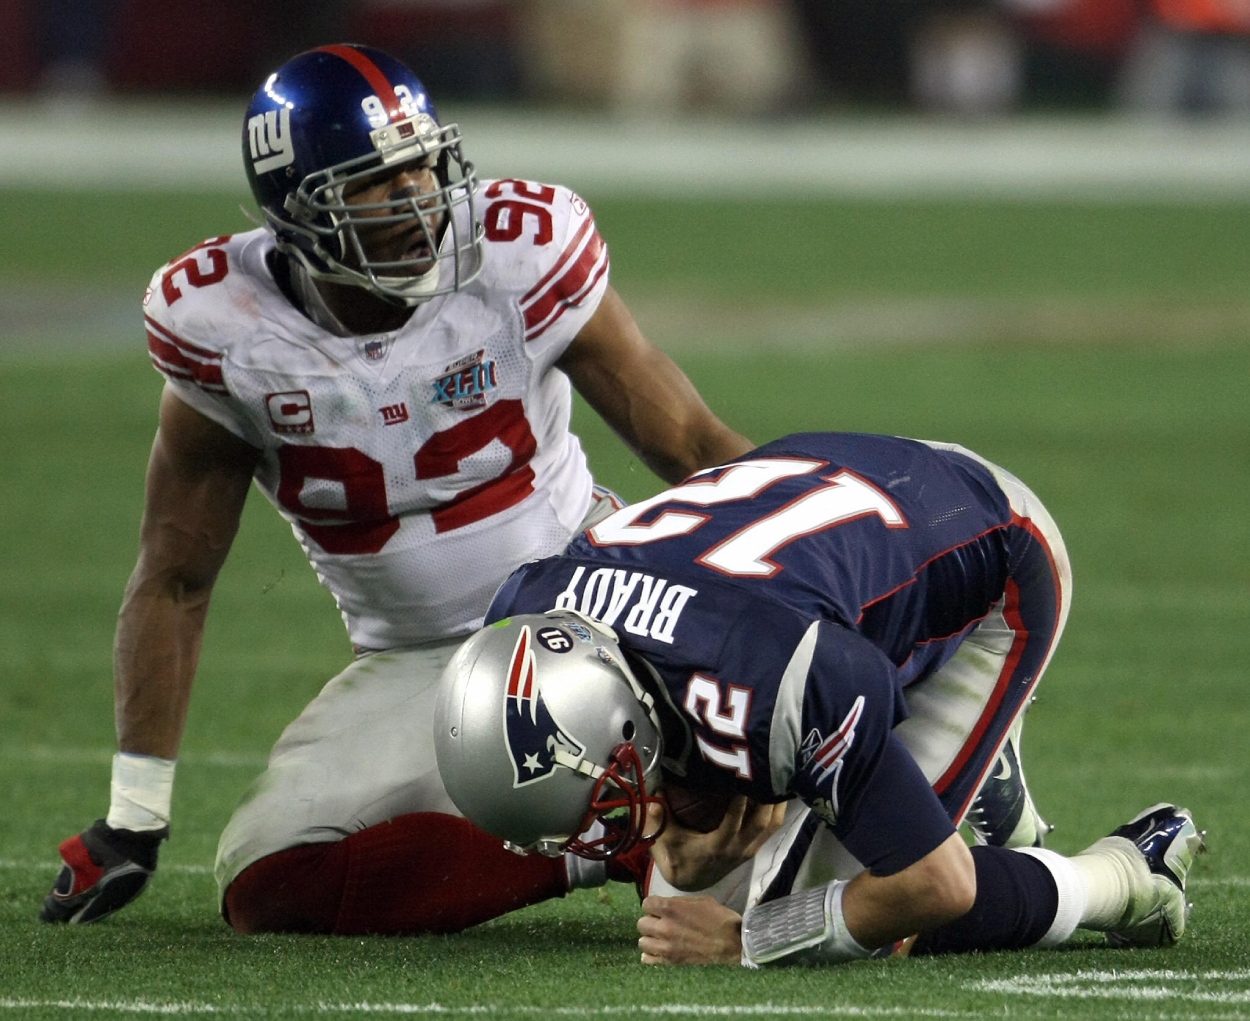 Giants great Michael Strahan offers Tom Brady some retirement advice